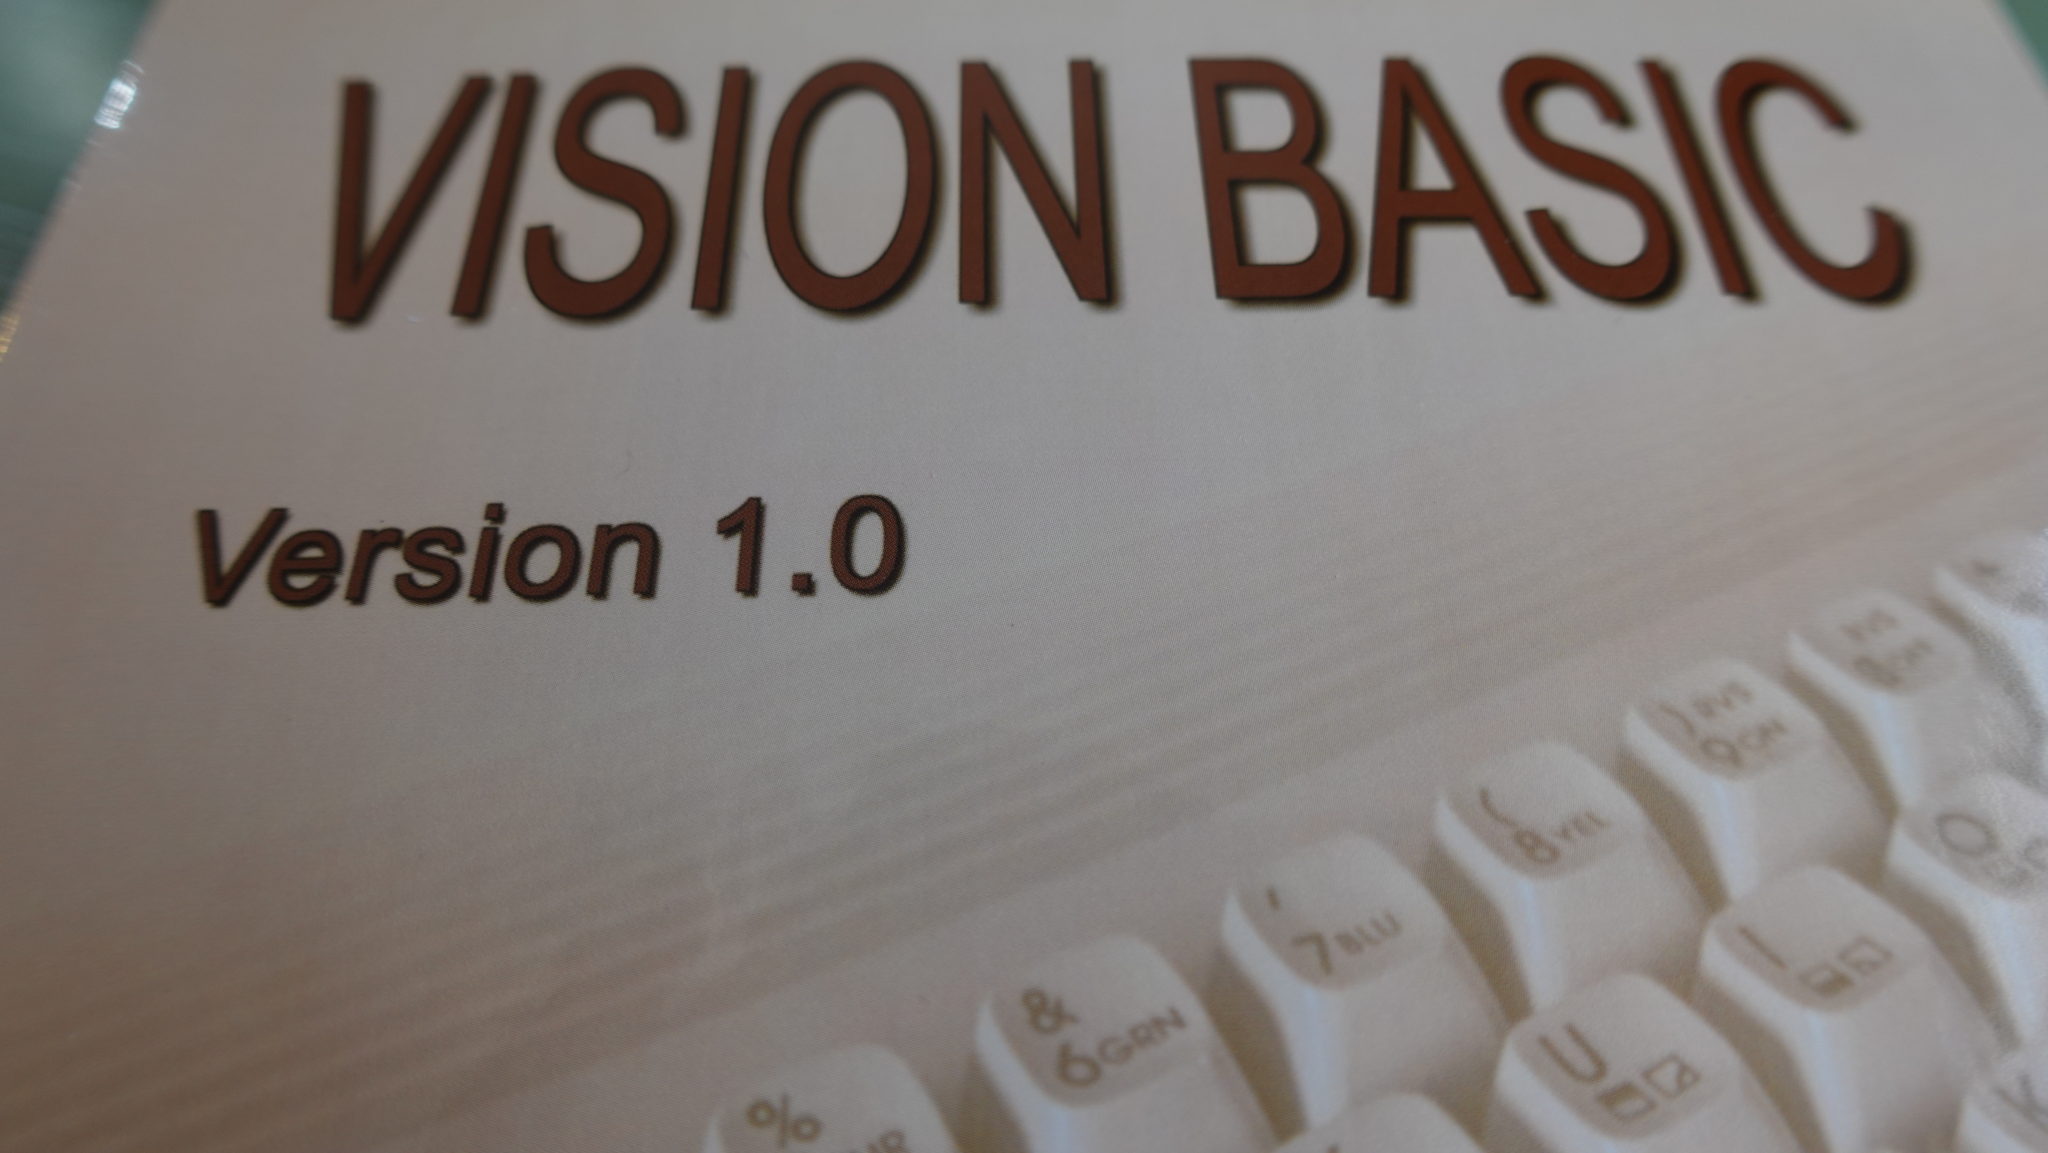 C64 Exploring Vision Basic | First Look